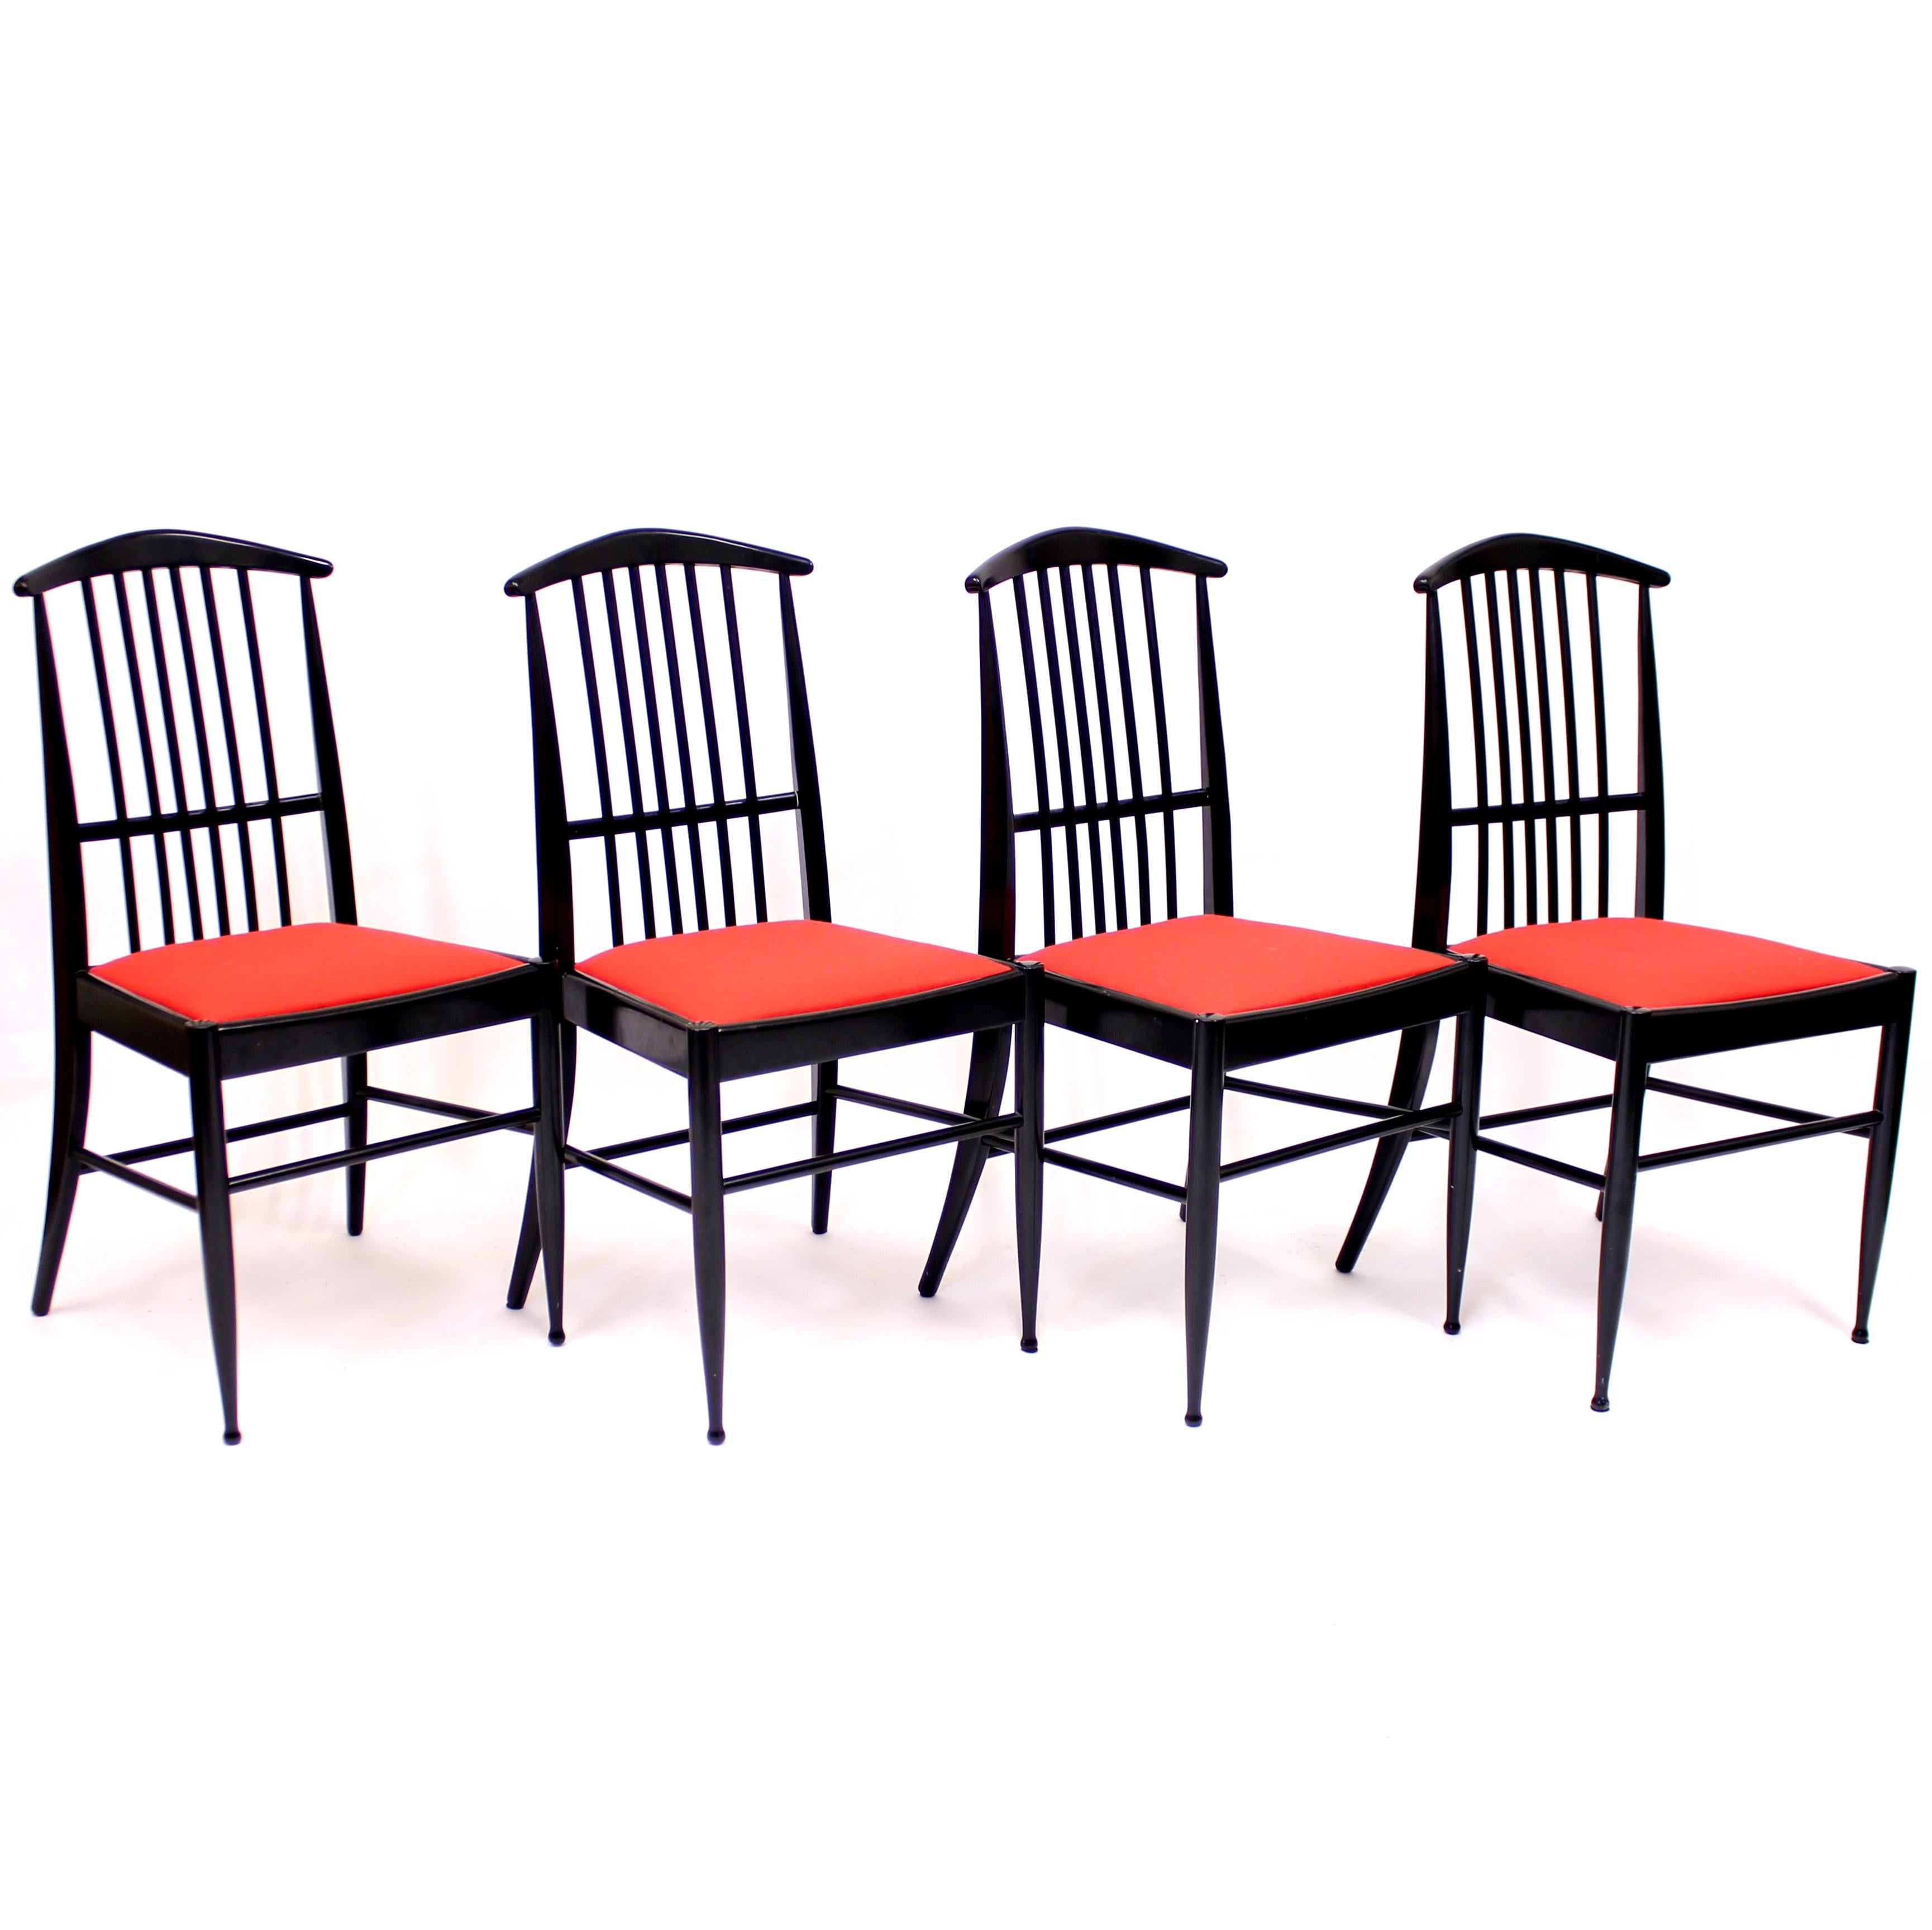 Kerstin Hörlin-Holmquist, set of 4 Charlotte dining chairs, ASKO, 1970s In Good Condition For Sale In Uppsala, SE